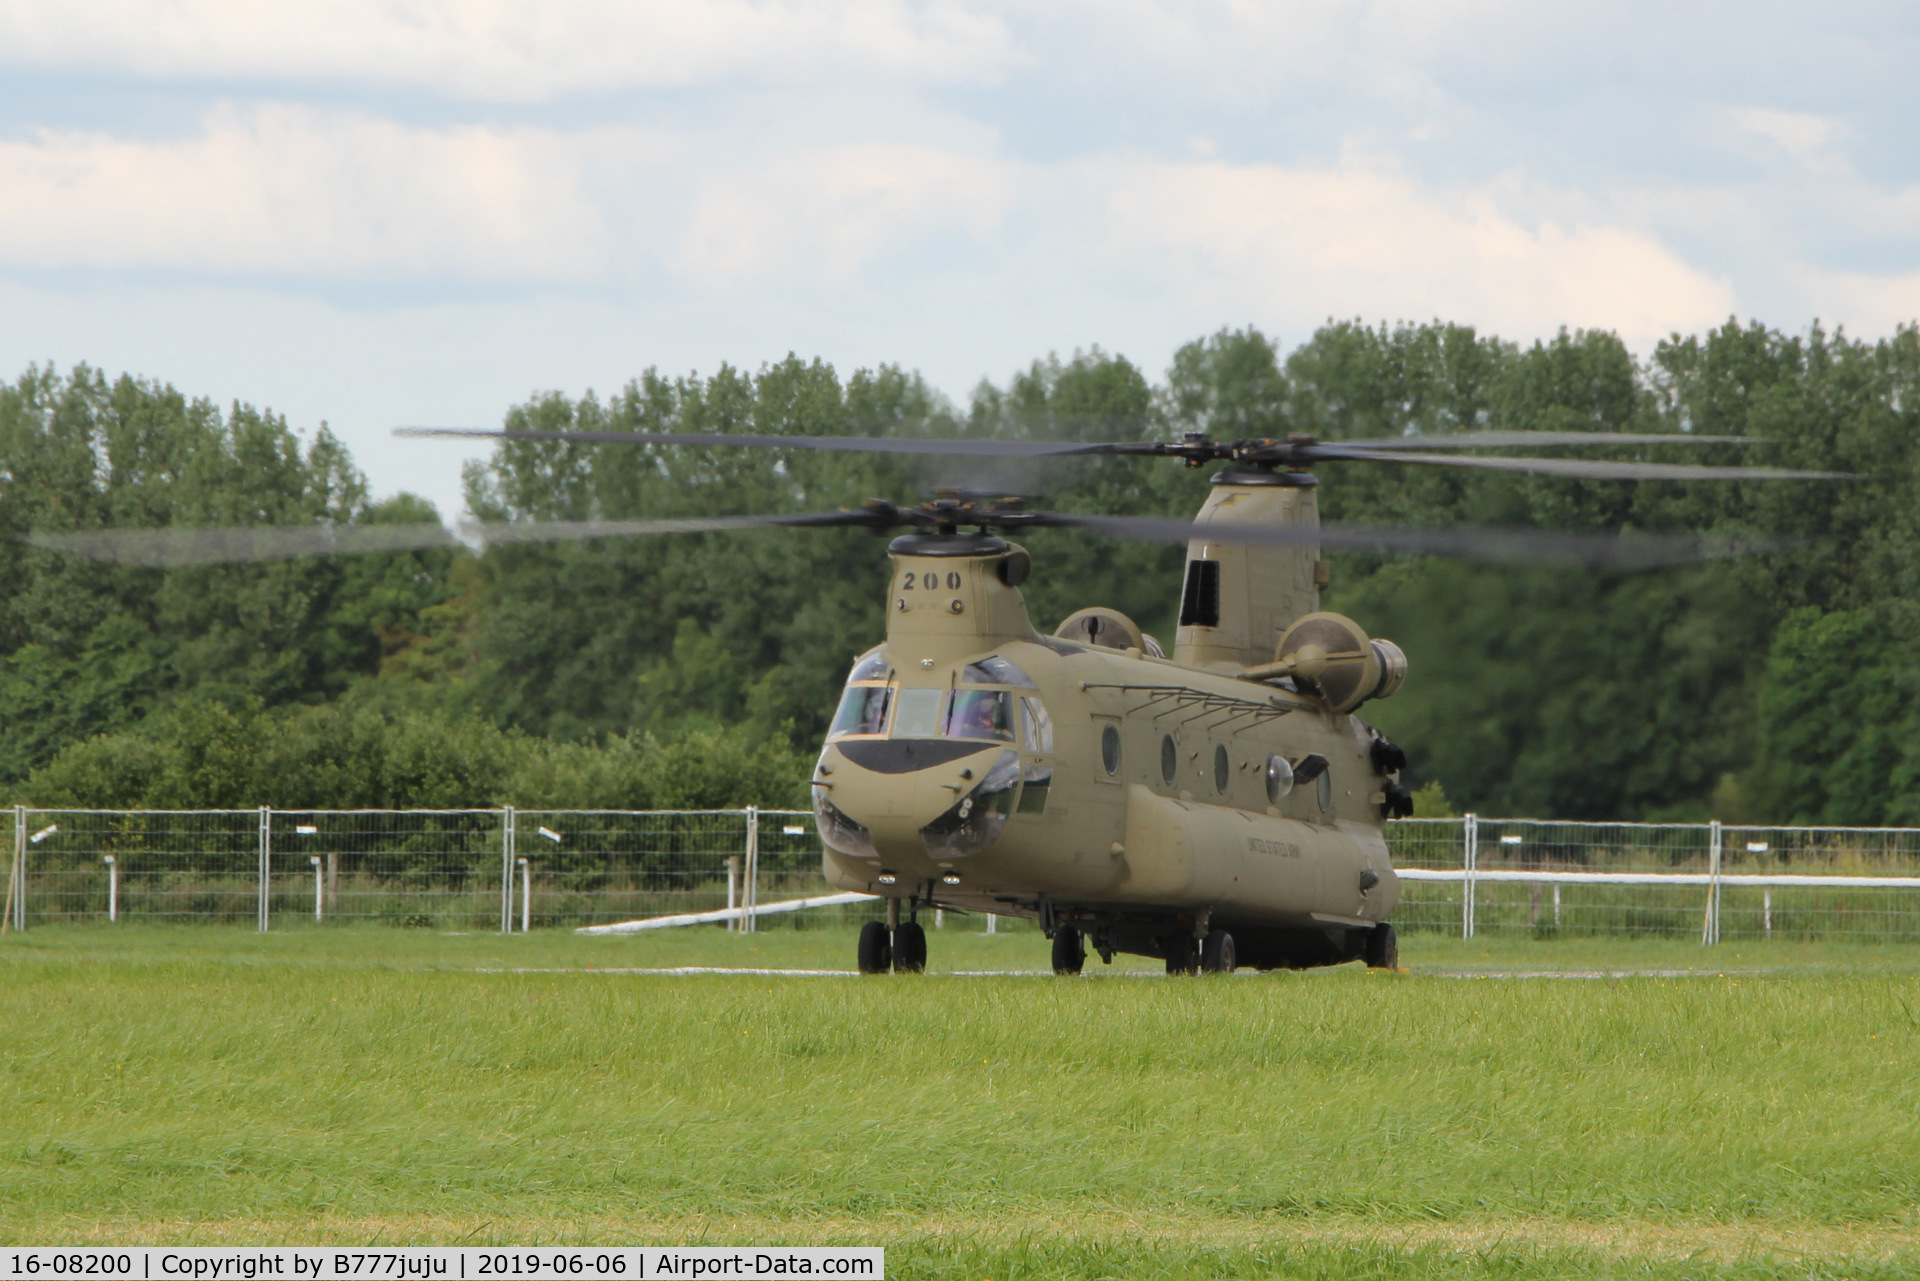 16-08200, Boeing CH-47F Chinook C/N M.8200, for 75 D-Day anniversary
at Carentan